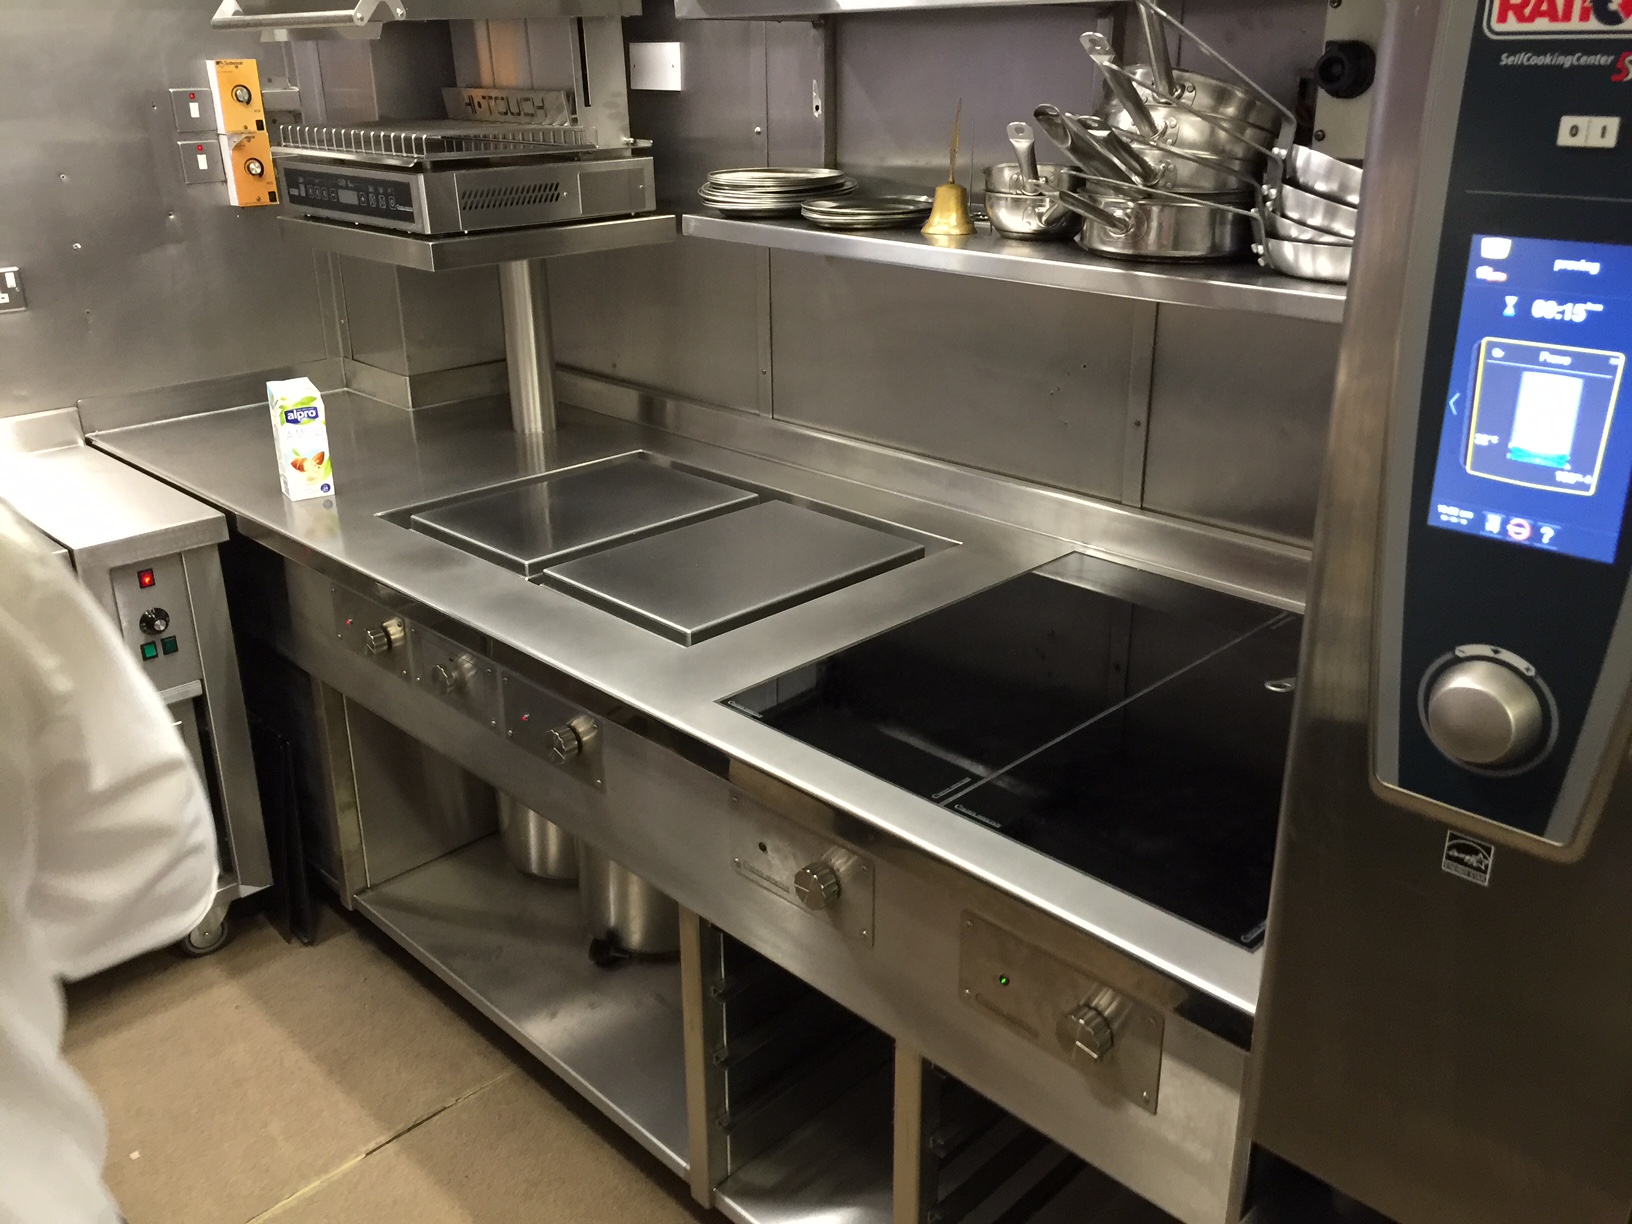 Finished induction cooking suite next to combi oven